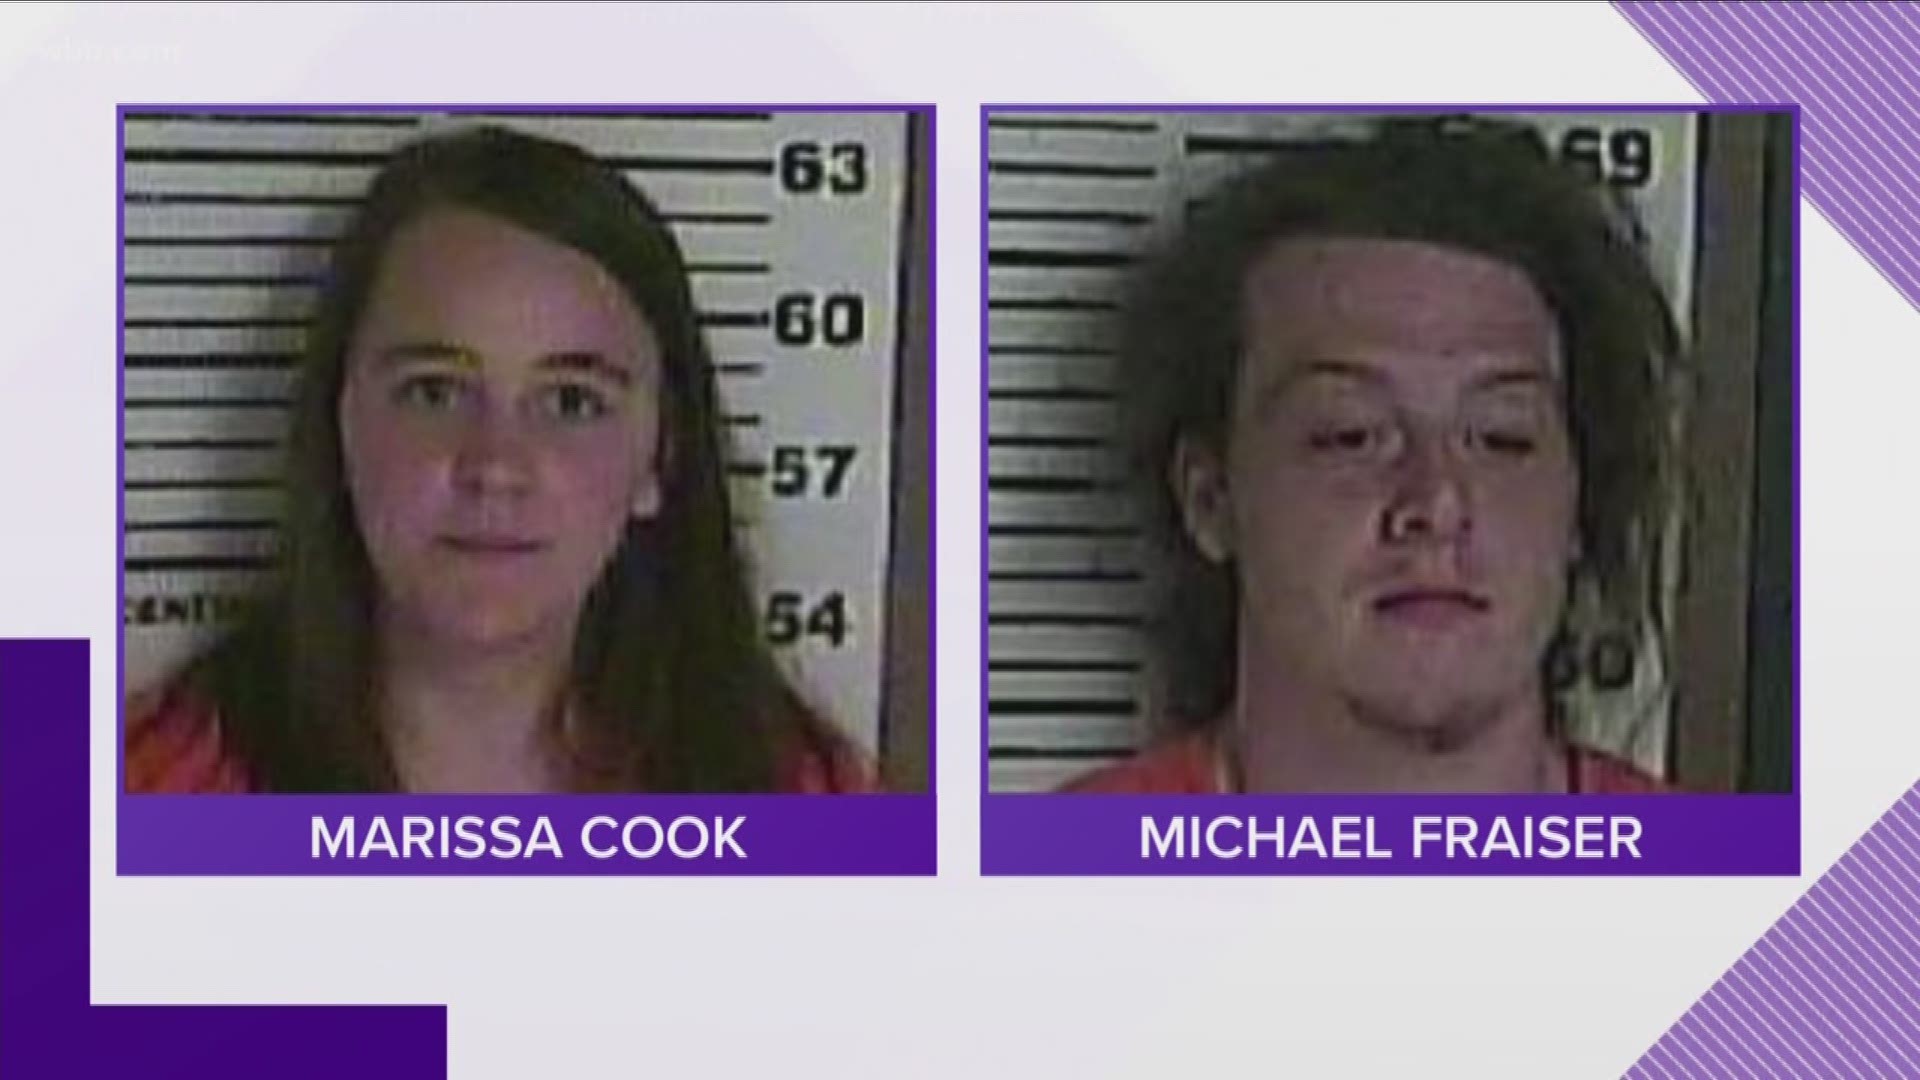 Both parents are charged with severe child abuse and neglect after the mother admitted to police that she squeezed and shook the 3-month-old baby.